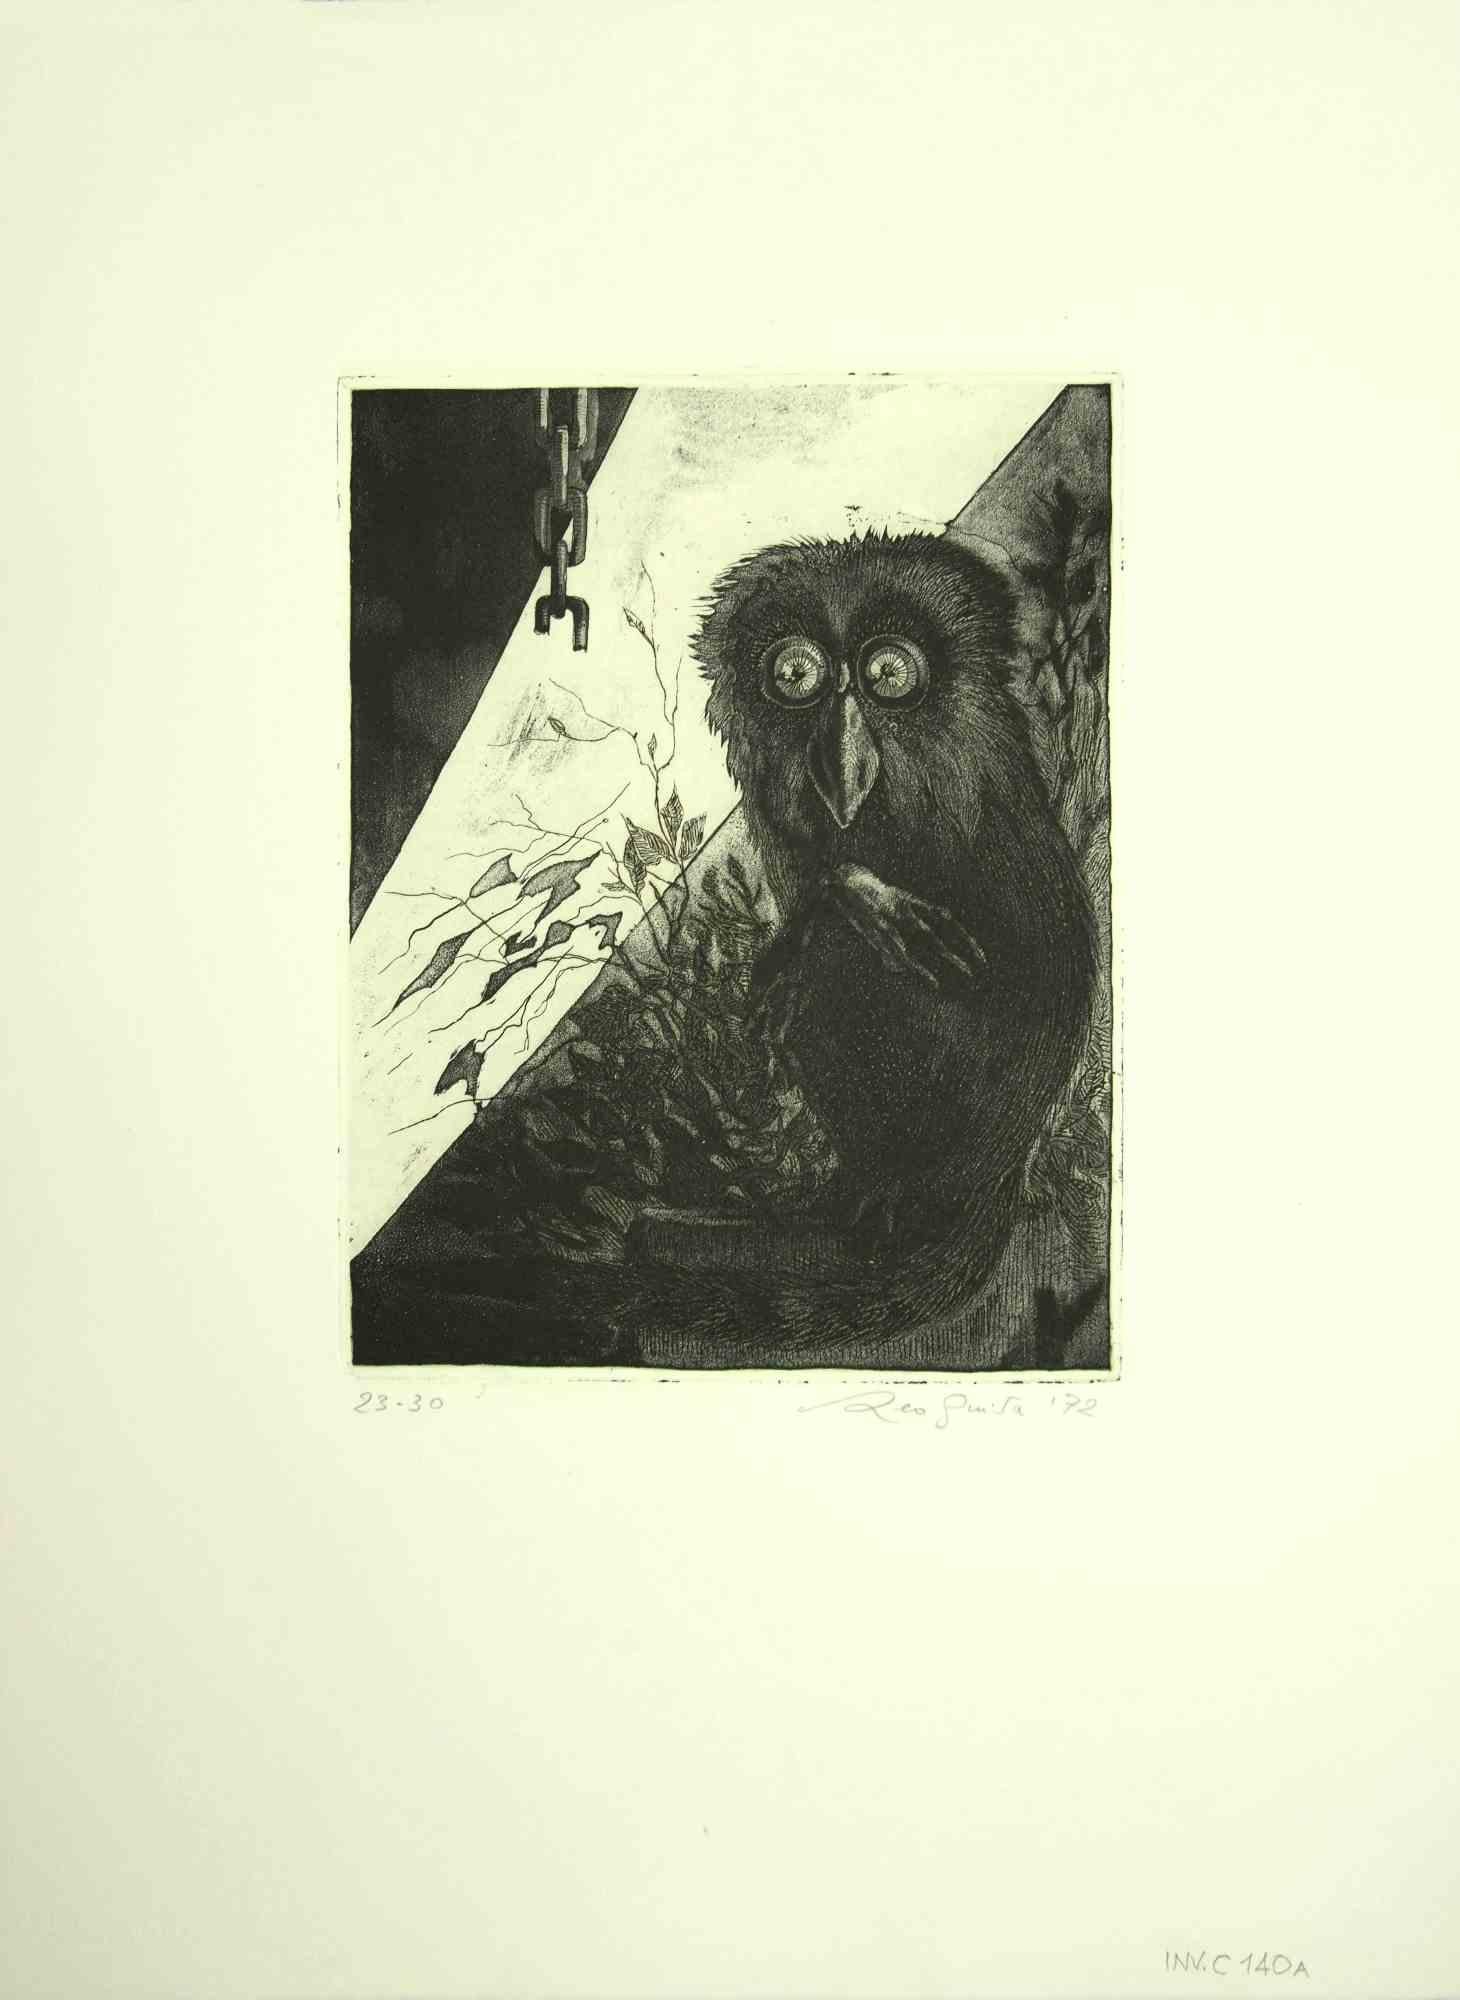 The owl is an original etching print realized by Leo Guida in 1972.

From the edition of 30 prints.

Guter Zustand.
 
Leo Guida  (1992 - 2017). Sensitive to current issues, artistic movements and historical techniques, Leo Guida has been able to